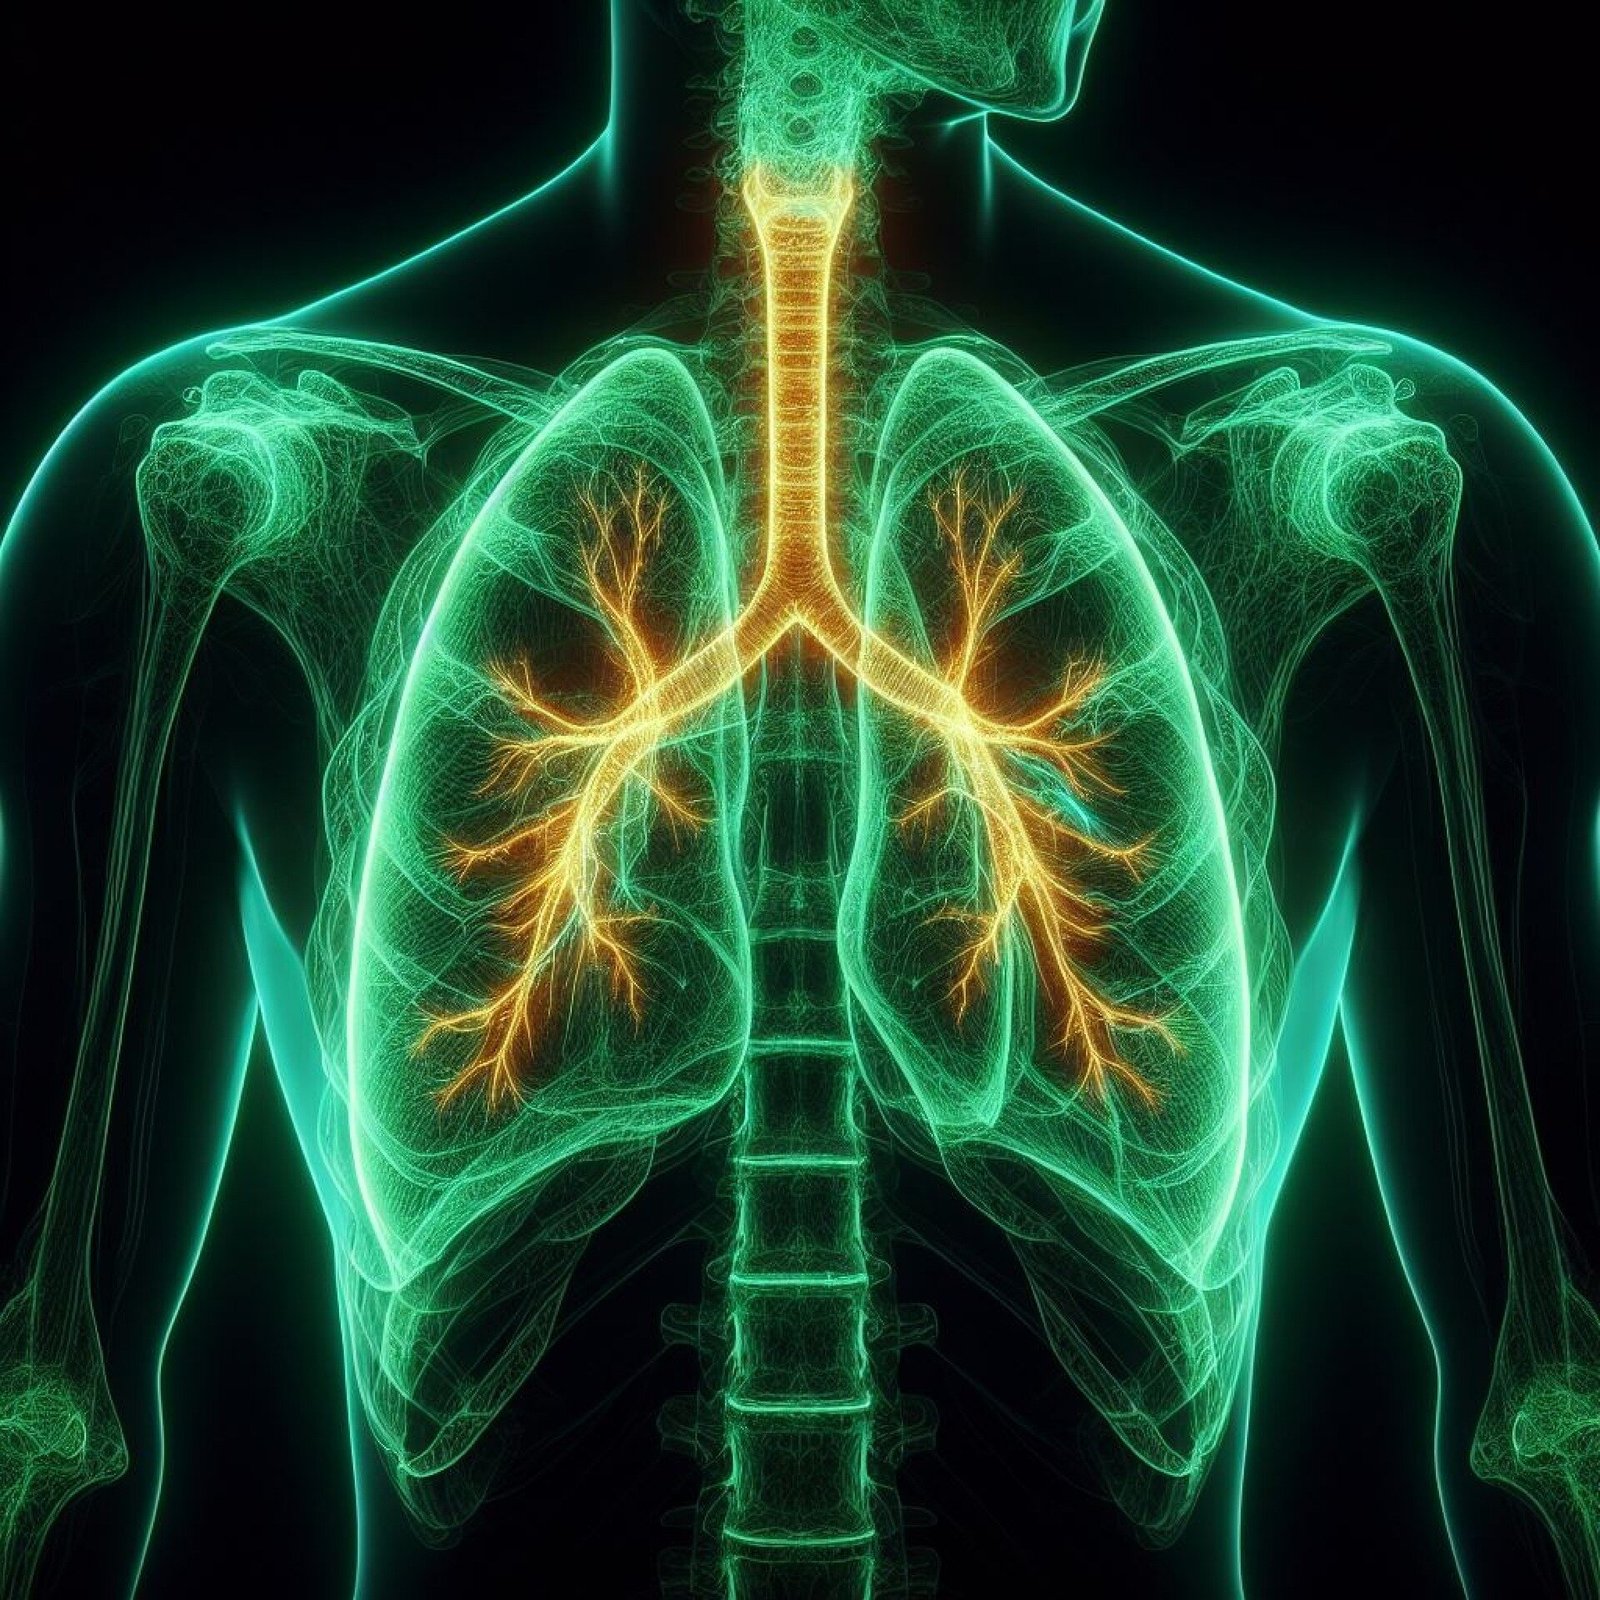 Tuberculosis can have a lasting impact on the lung health of successfully treated individuals